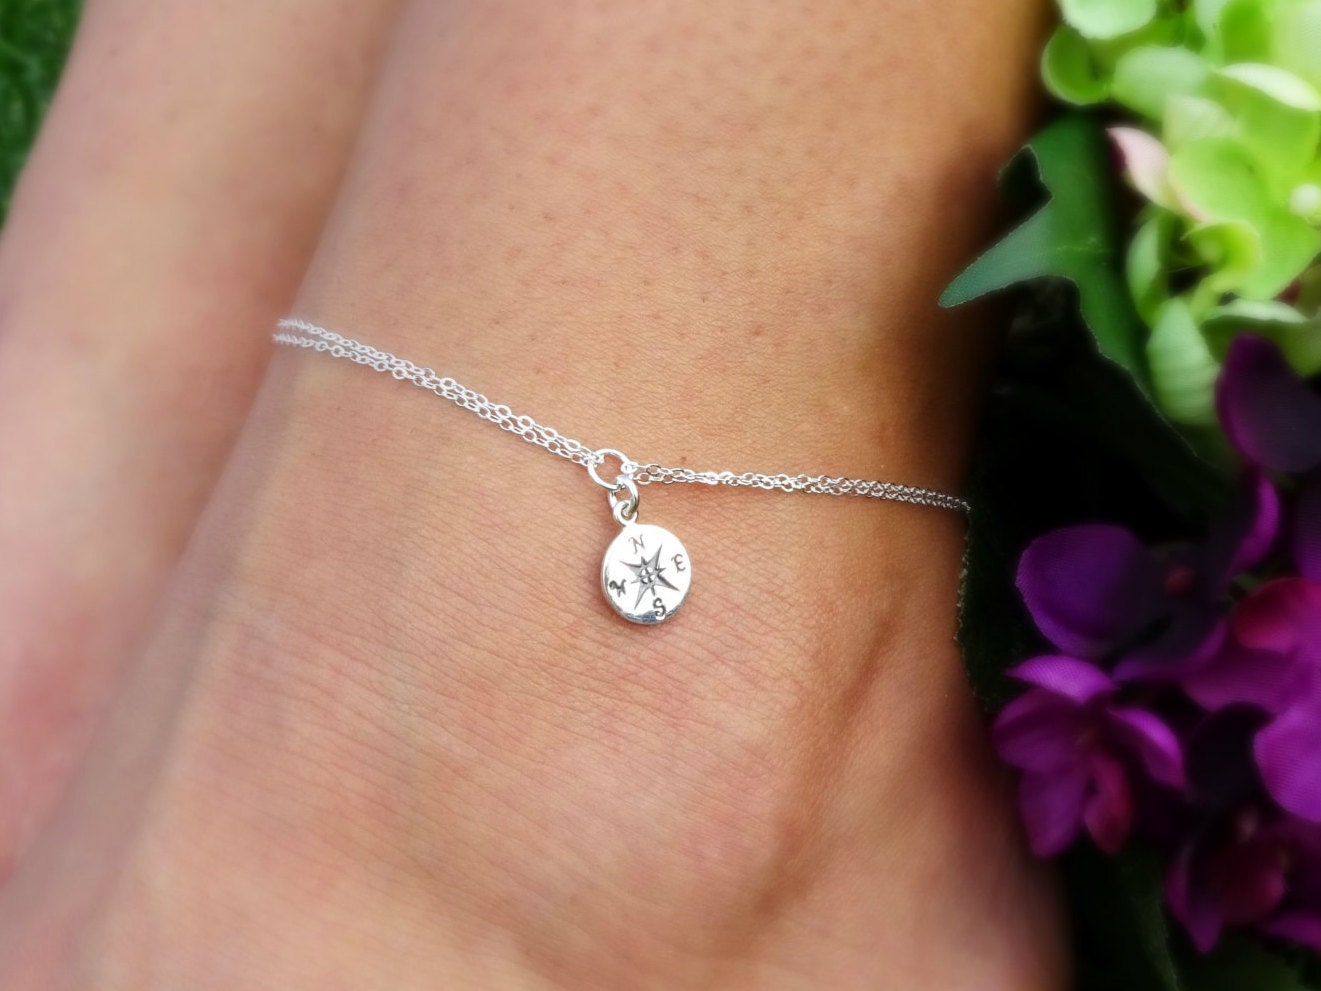 Compass charm Anklet, Graduation gift,  Ankle bracelet, Bridesmaid gifts, college graduation gift for her, Graduate gift, gifts for grads